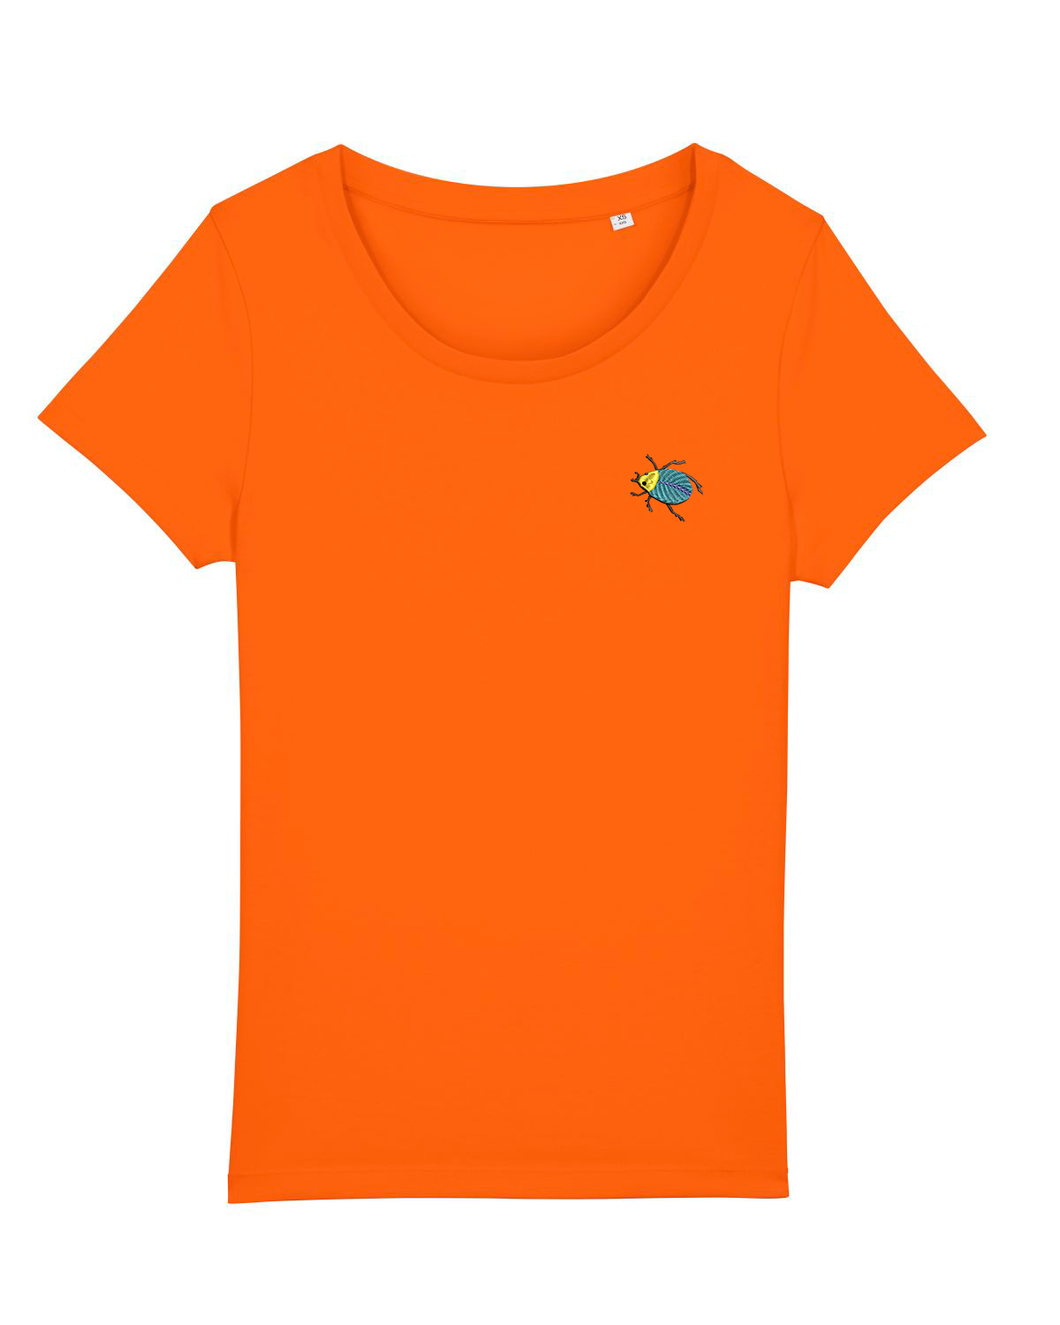 BUG - Embroidered women's t-shirt